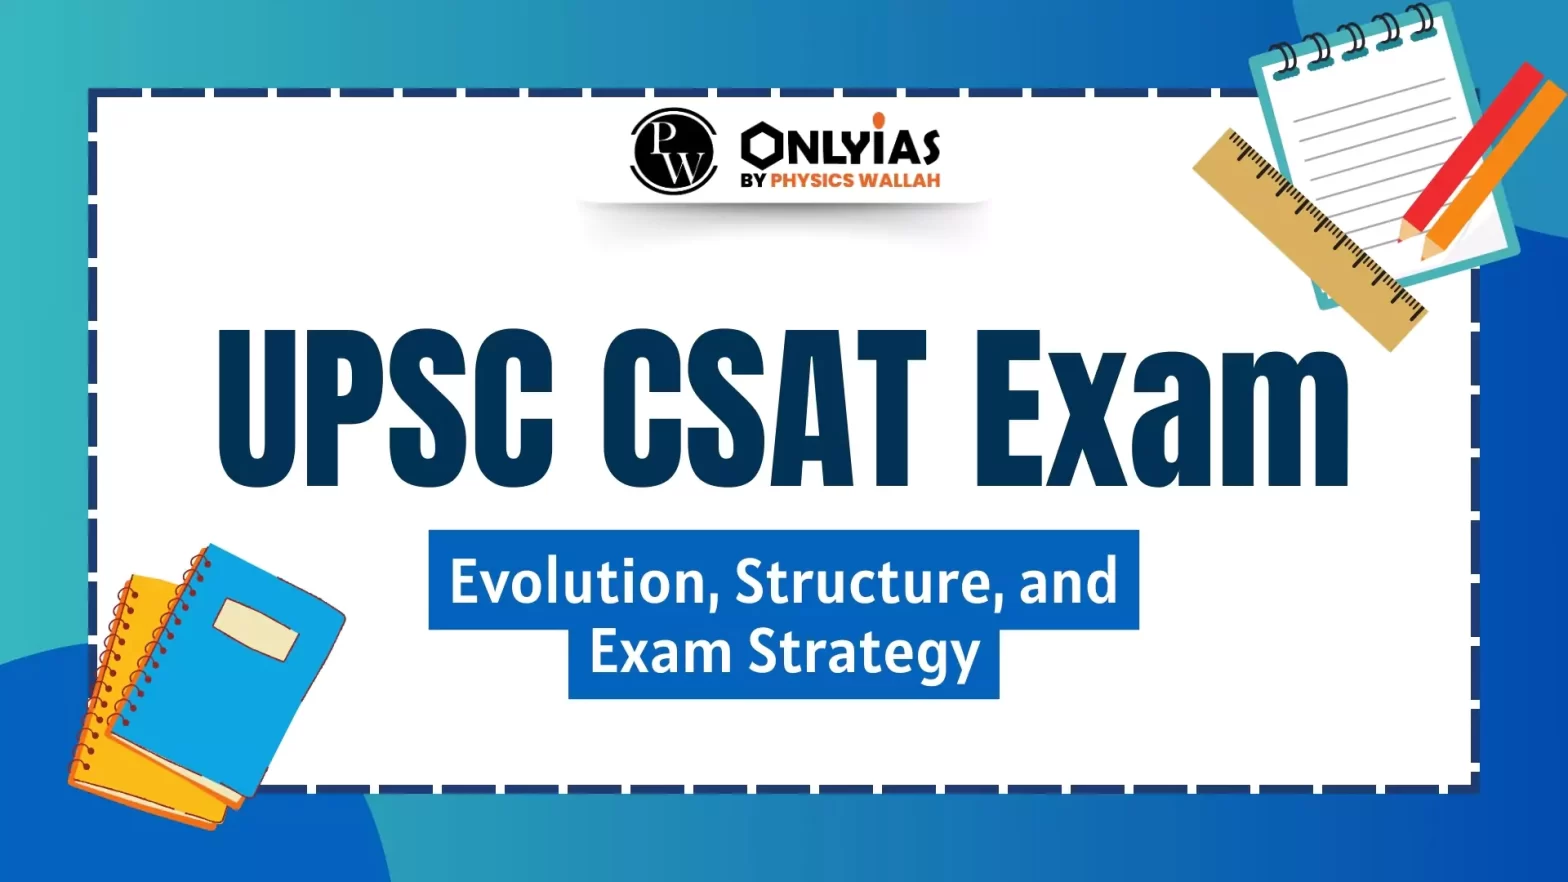 UPSC CSAT Exam: Evolution, Structure, and Exam Strategy